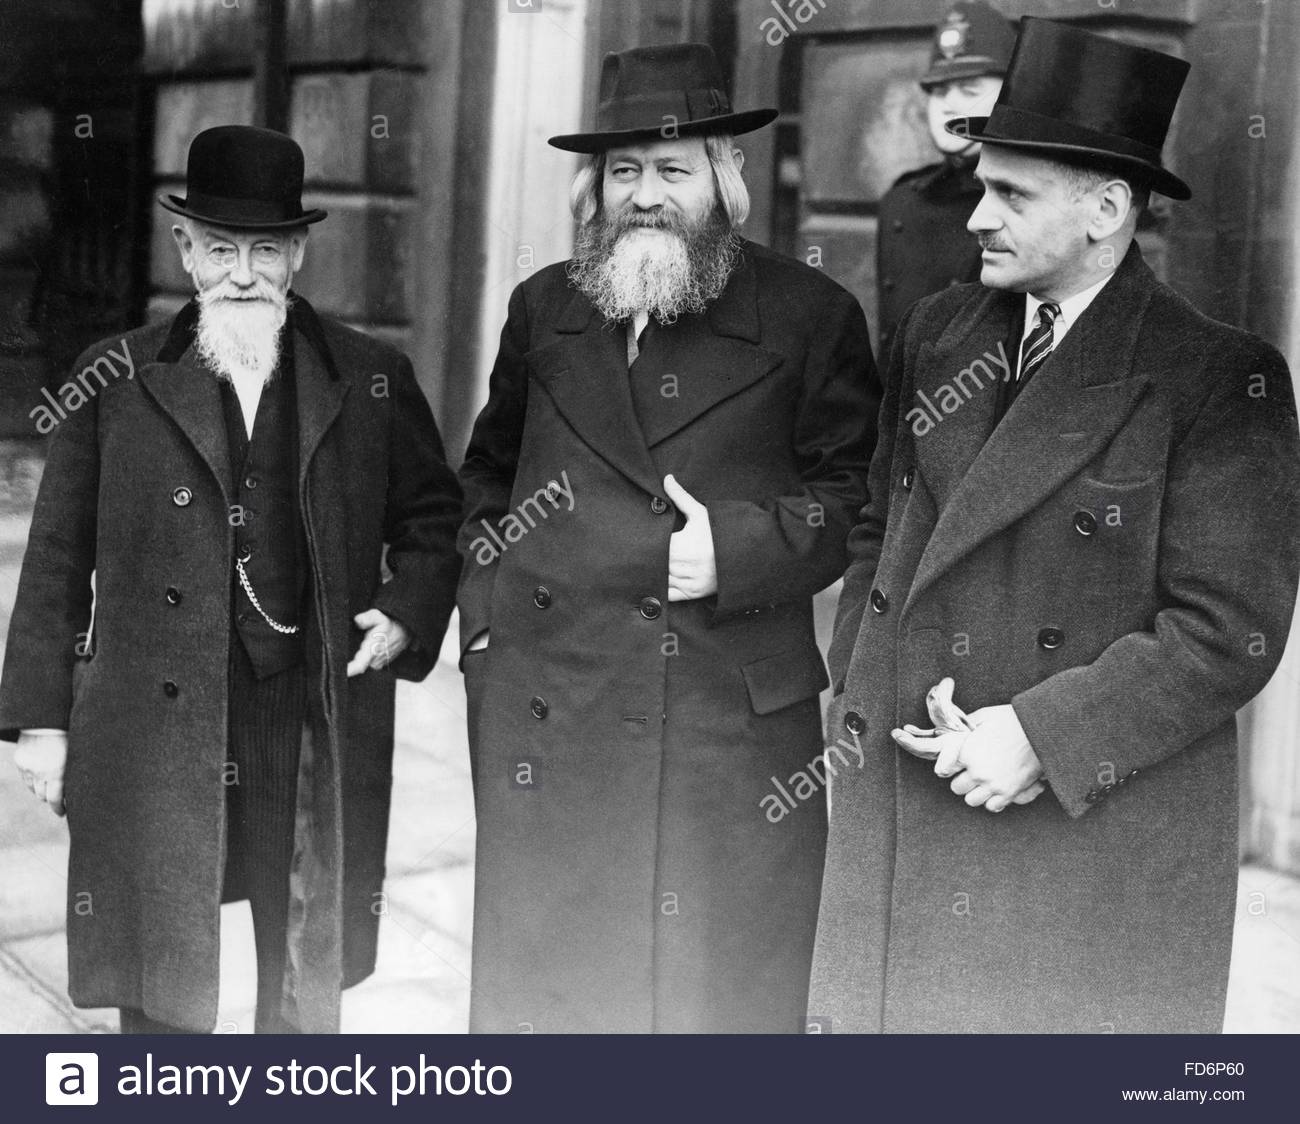 jewish-delegates-of-the-palestine-conference-in-london-1939-FD6P60.jpg